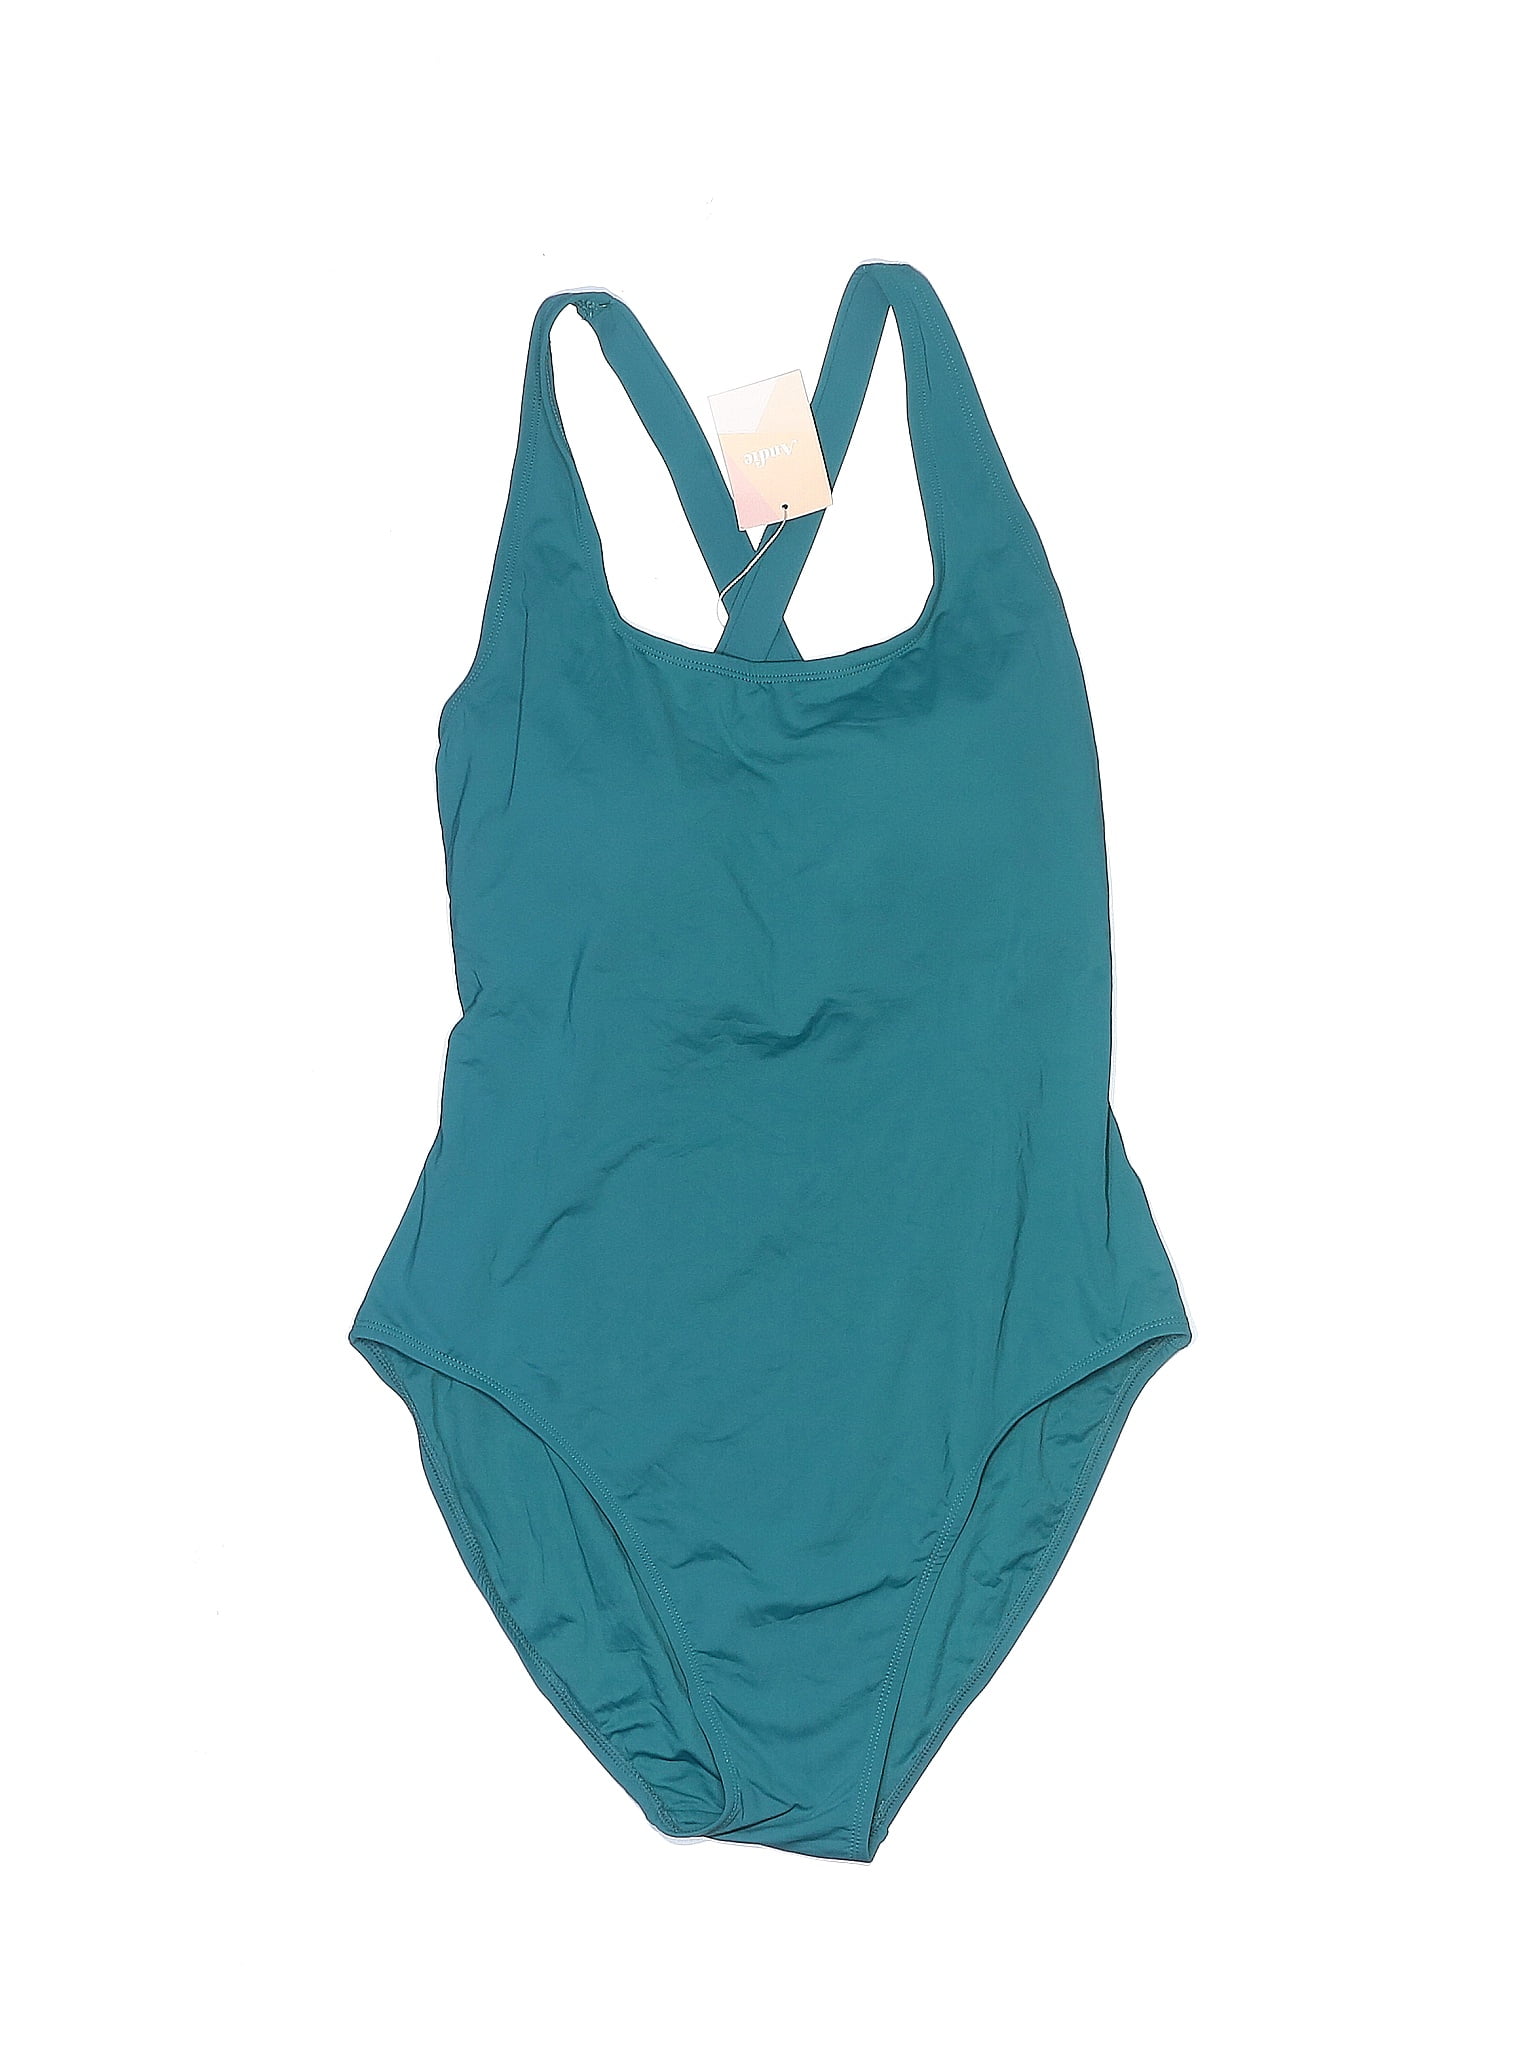 Andie Solid Teal One Piece Swimsuit Size XXL - 57% off | thredUP